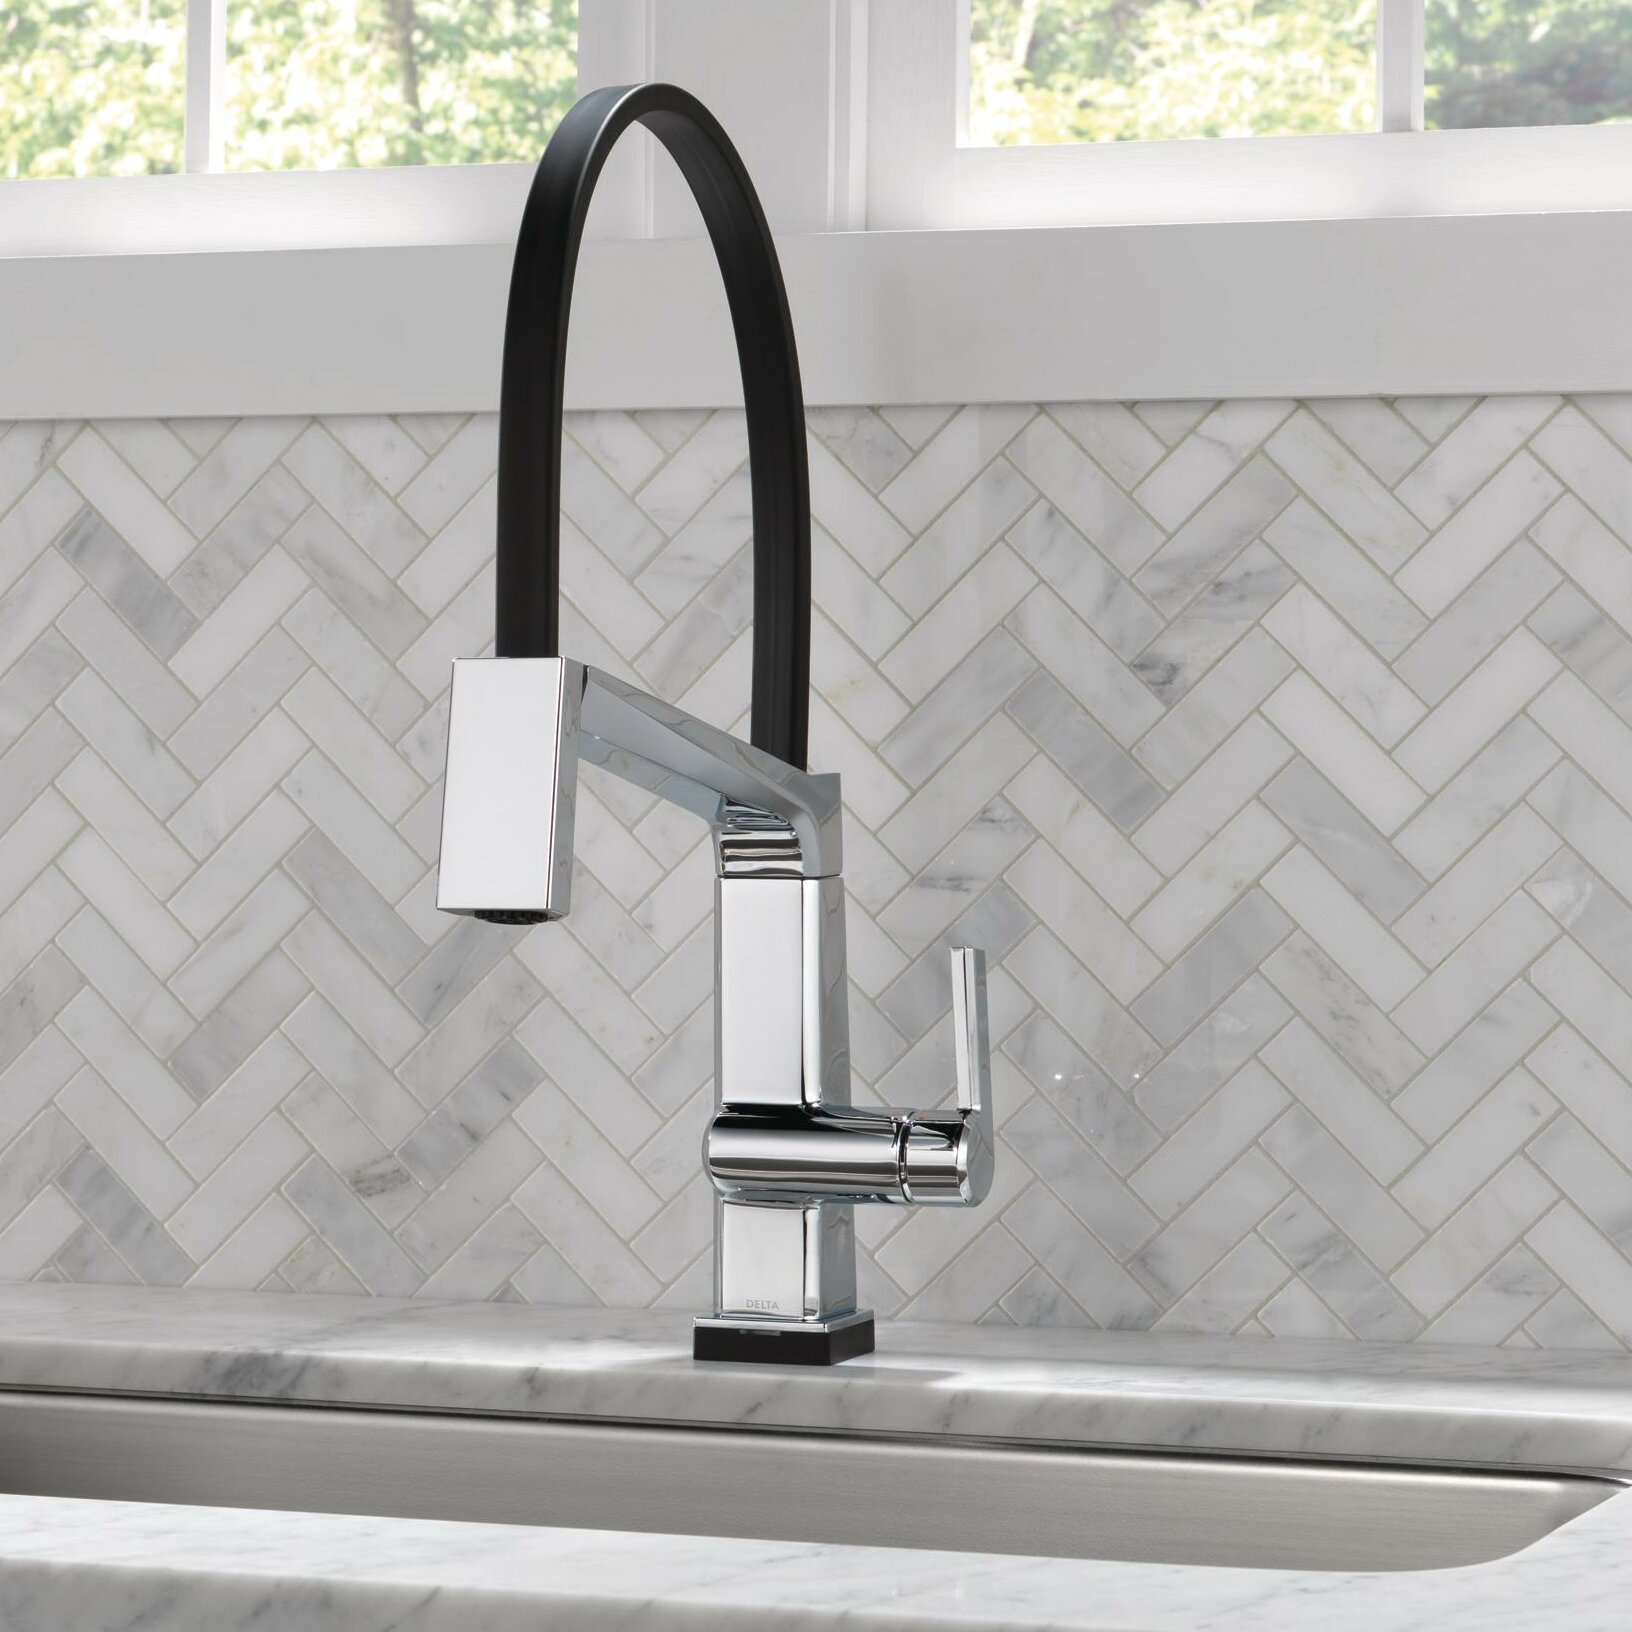 Delta Pivotal Touch Single Handle Kitchen Faucet With Touch20 Technology Reviews Wayfair